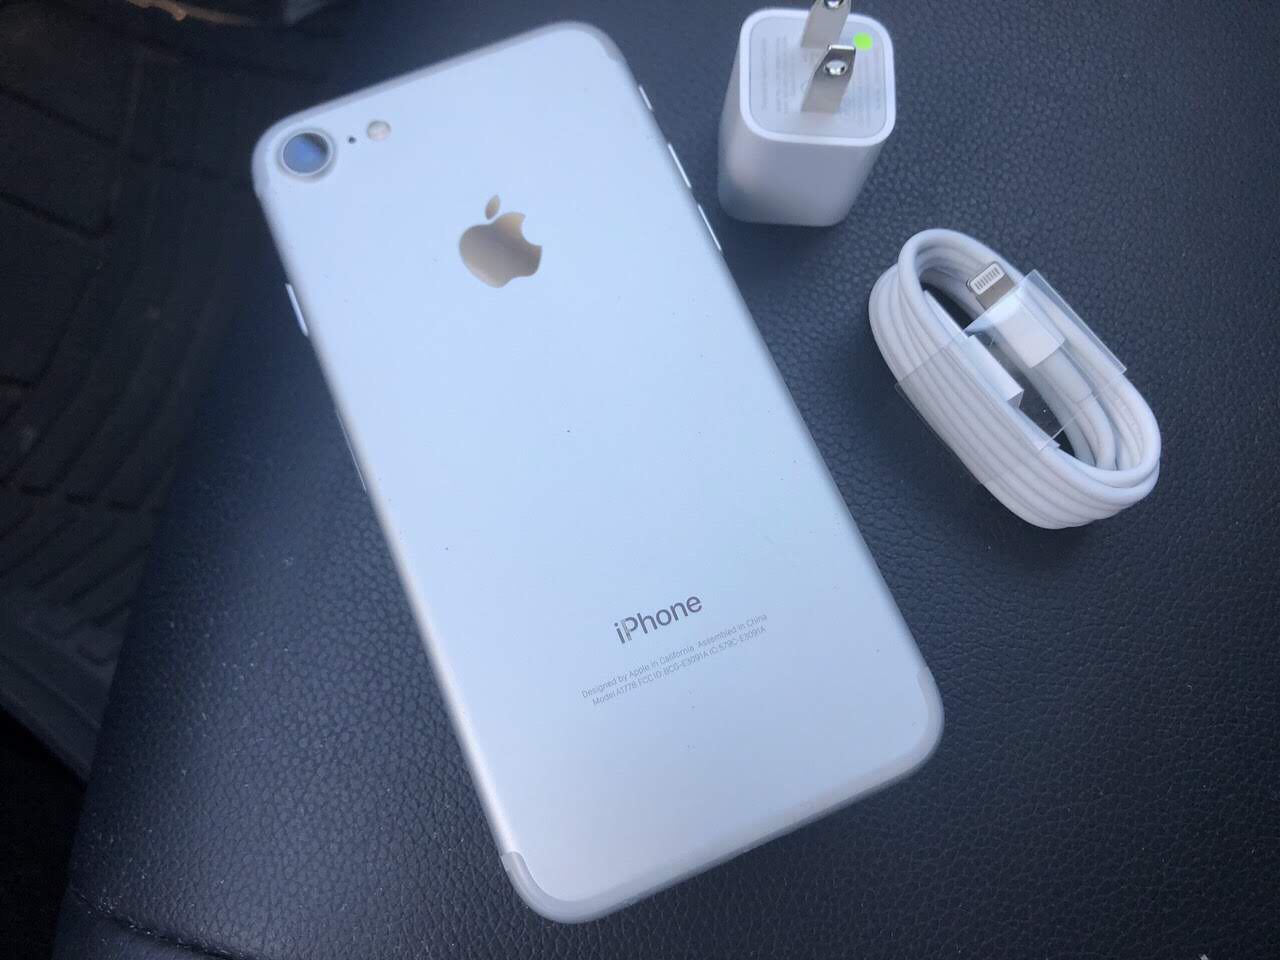 iPhone 7 just like NEW & FACTORY UNLOCKED